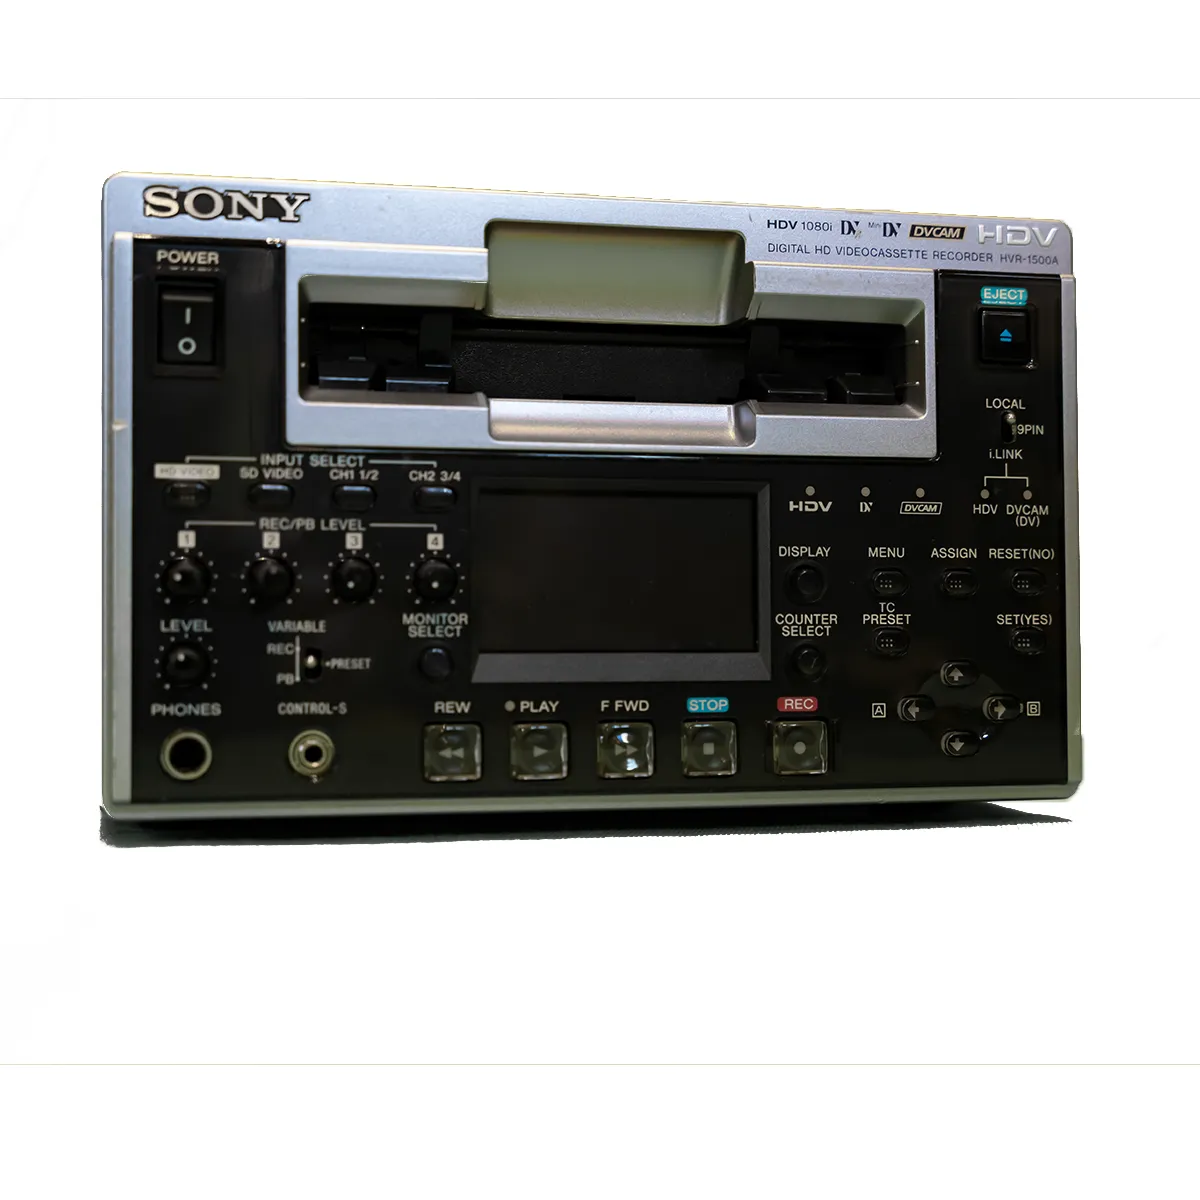 Sony CD-R recorder with SONY_HVR_1500A_VIDEO PLAYER.